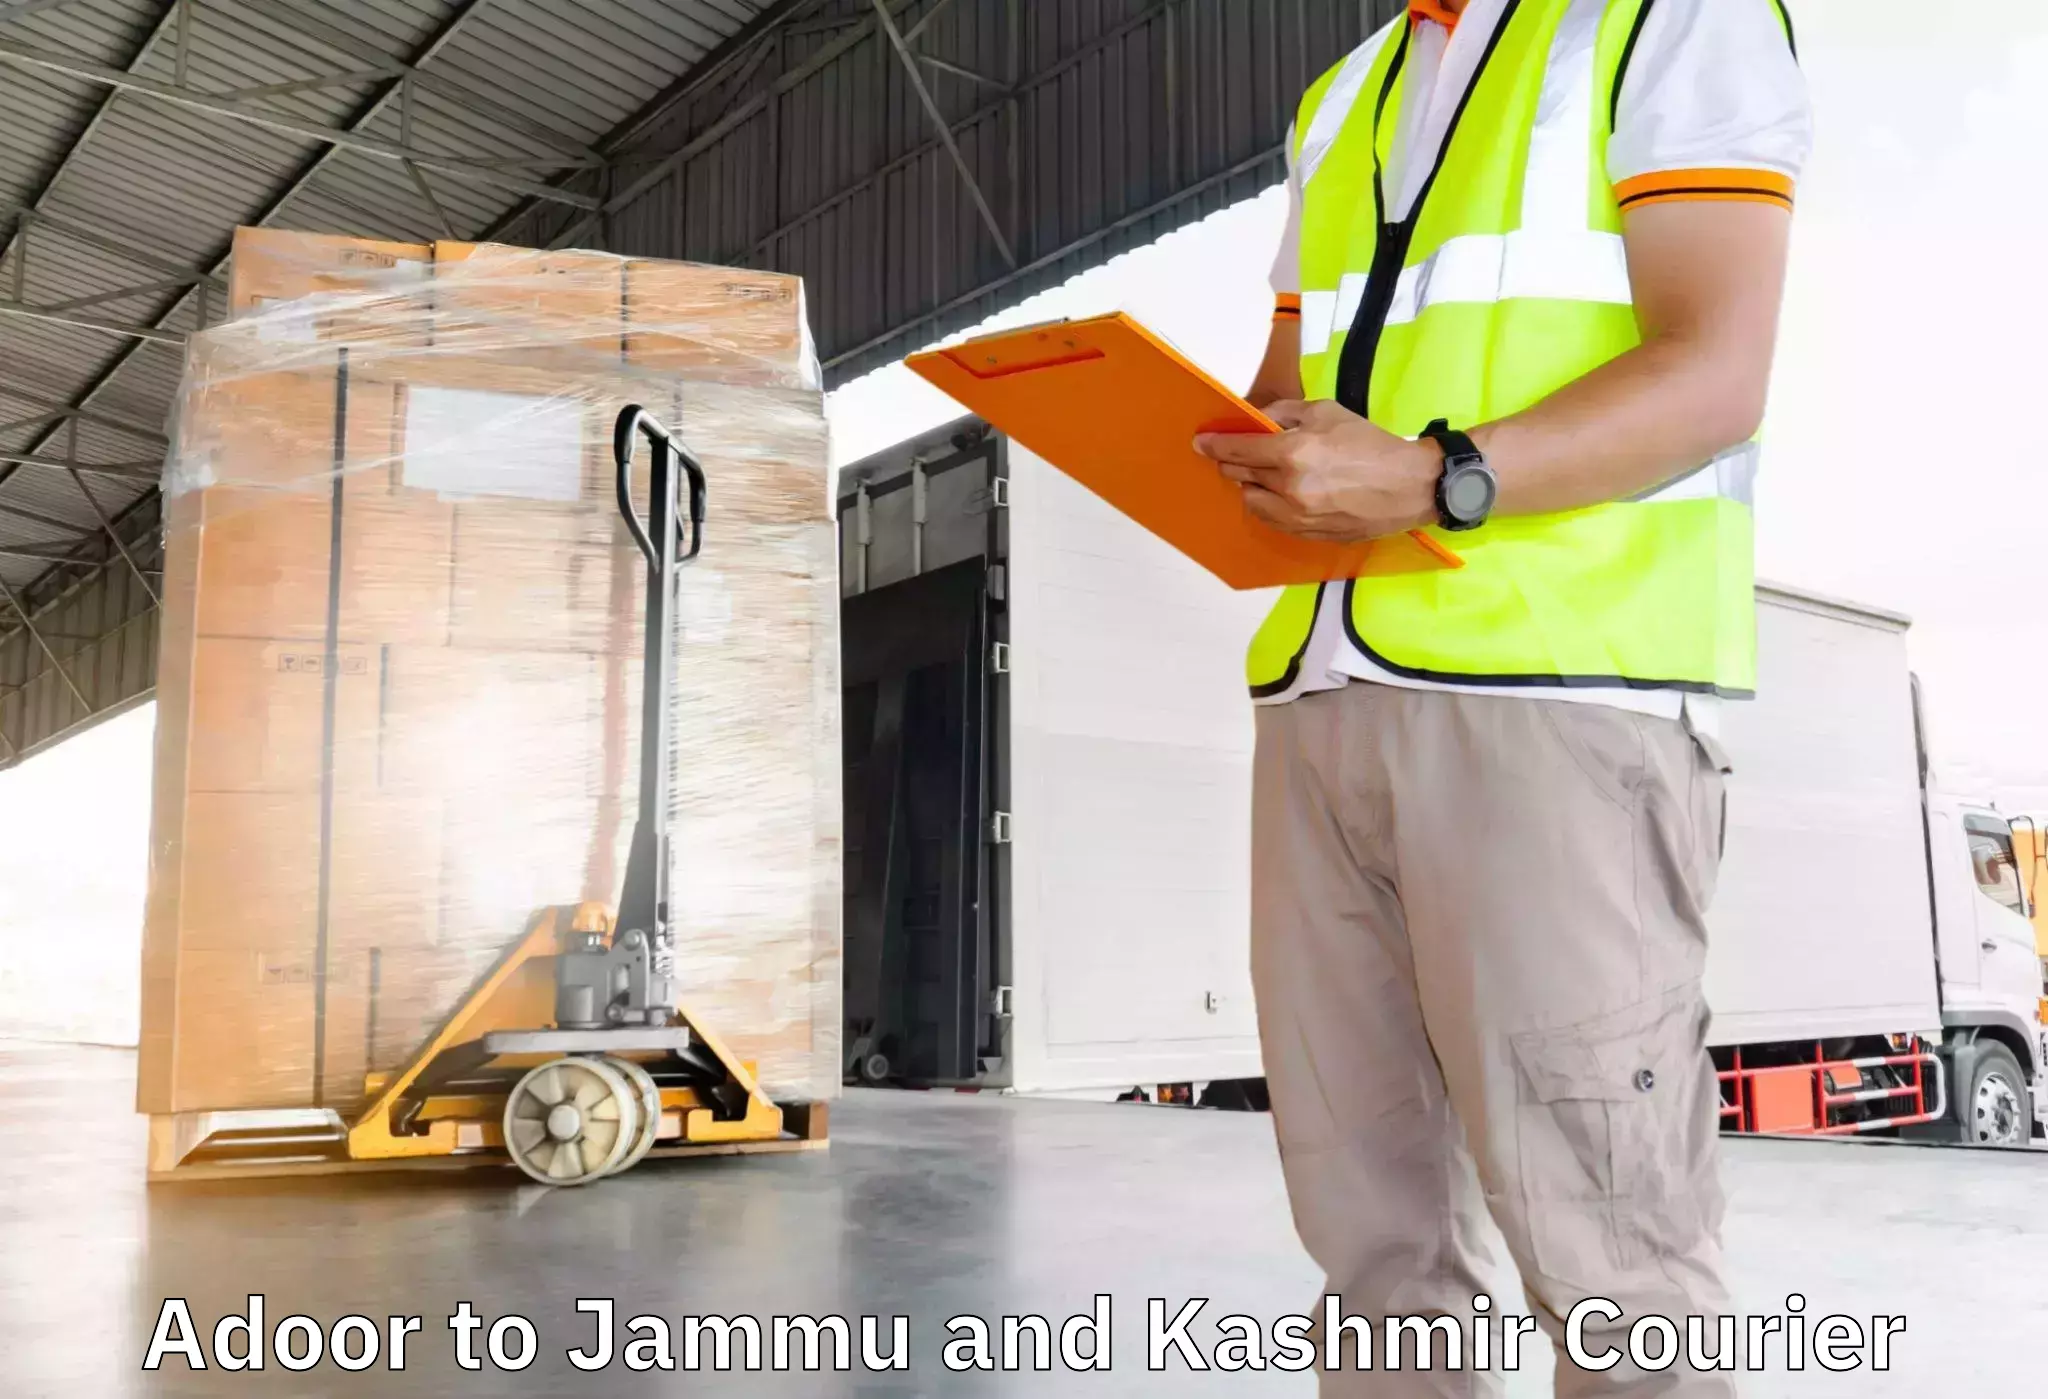 Efficient moving strategies Adoor to Pulwama